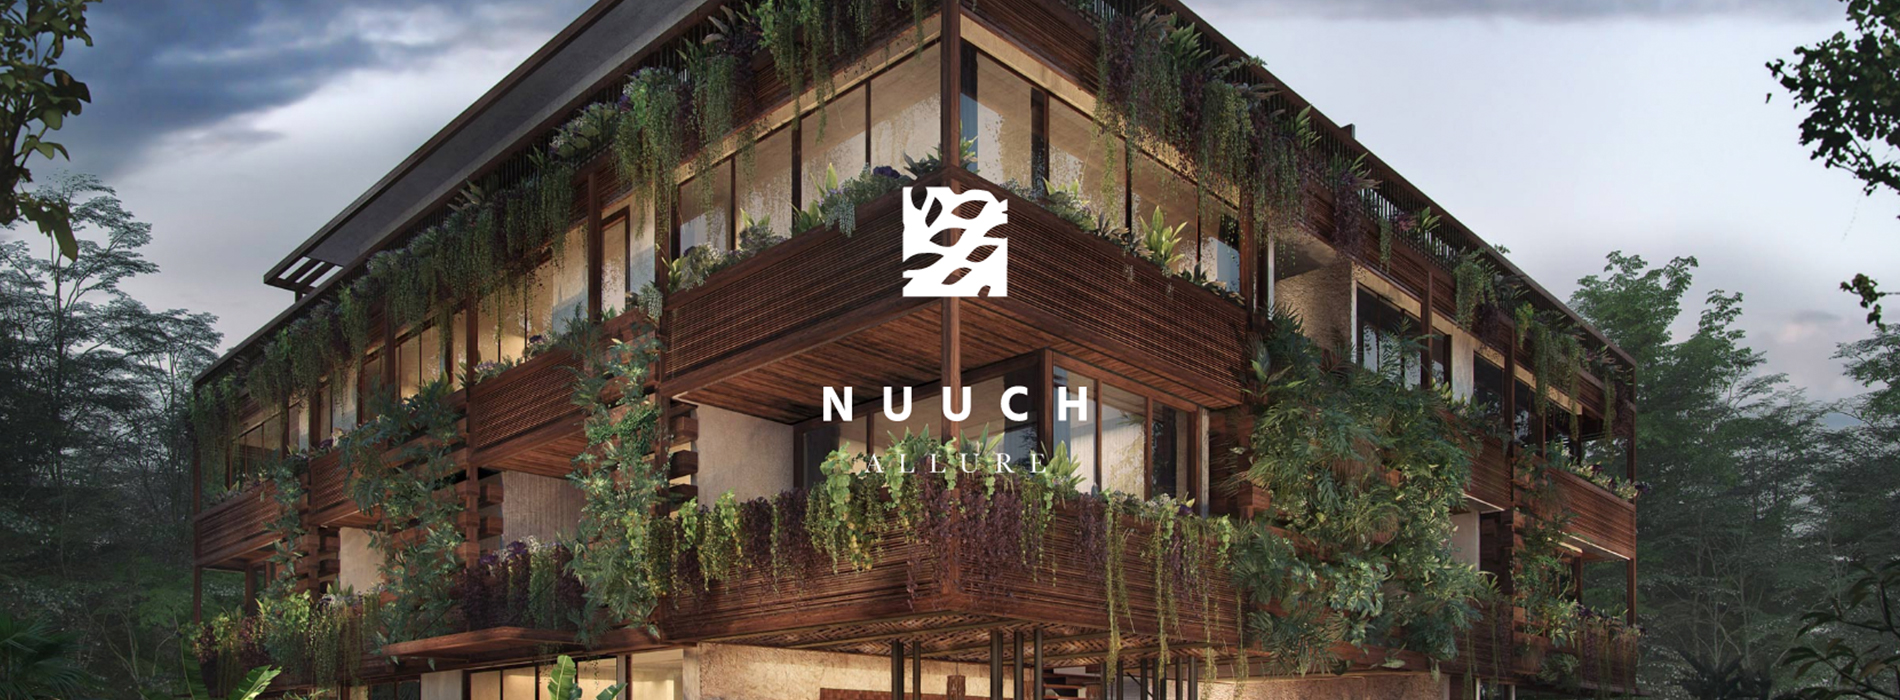 Nuuch apartments Goodlers